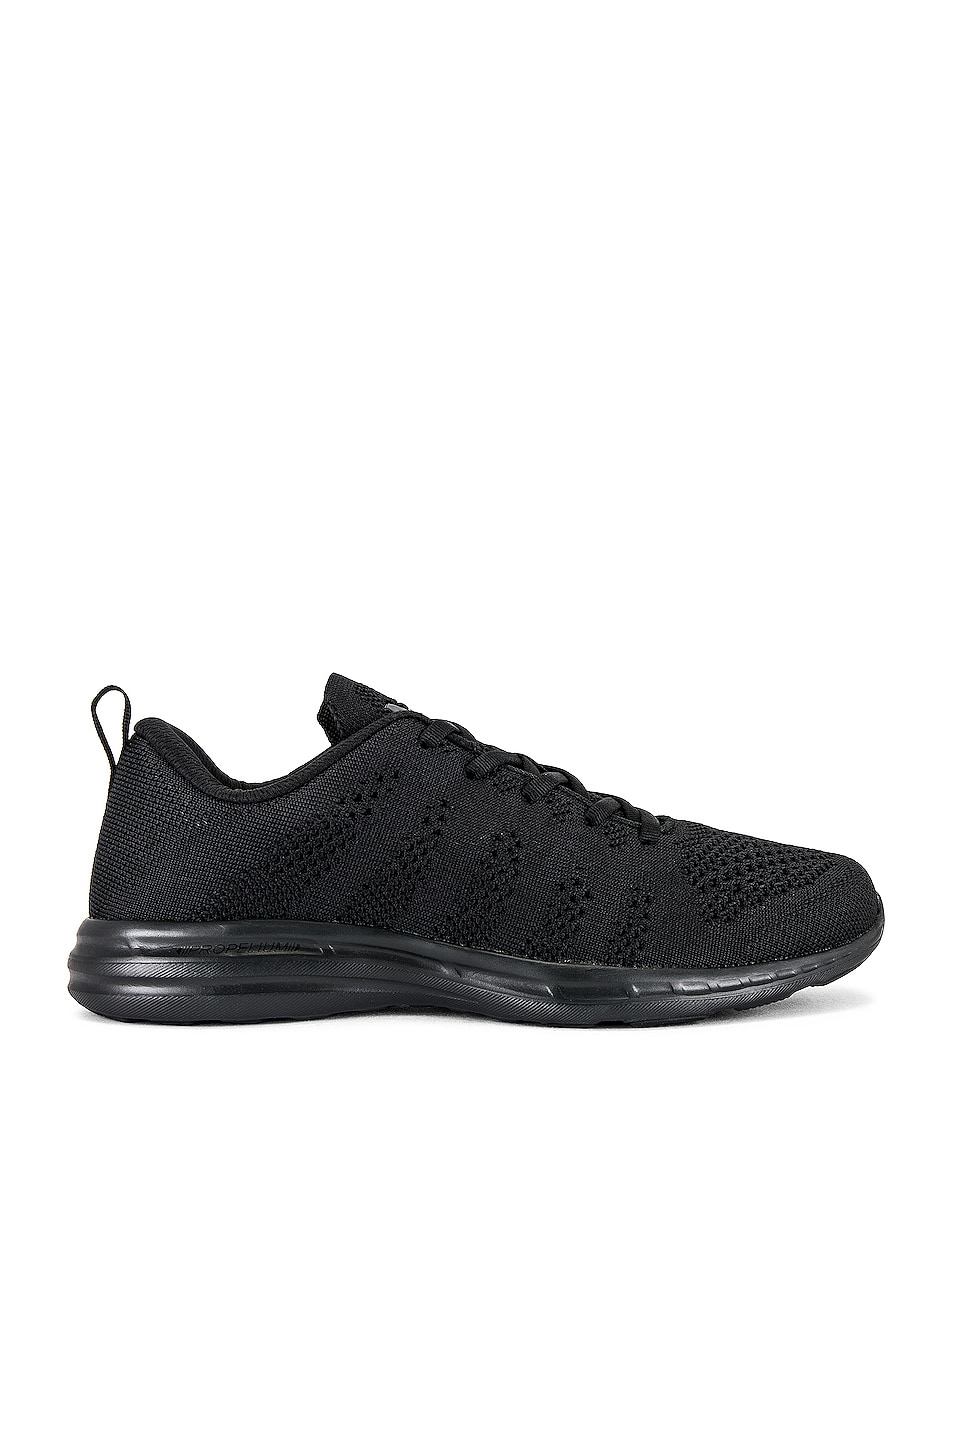 Image 1 of APL: Athletic Propulsion Labs Techloom Pro in Black